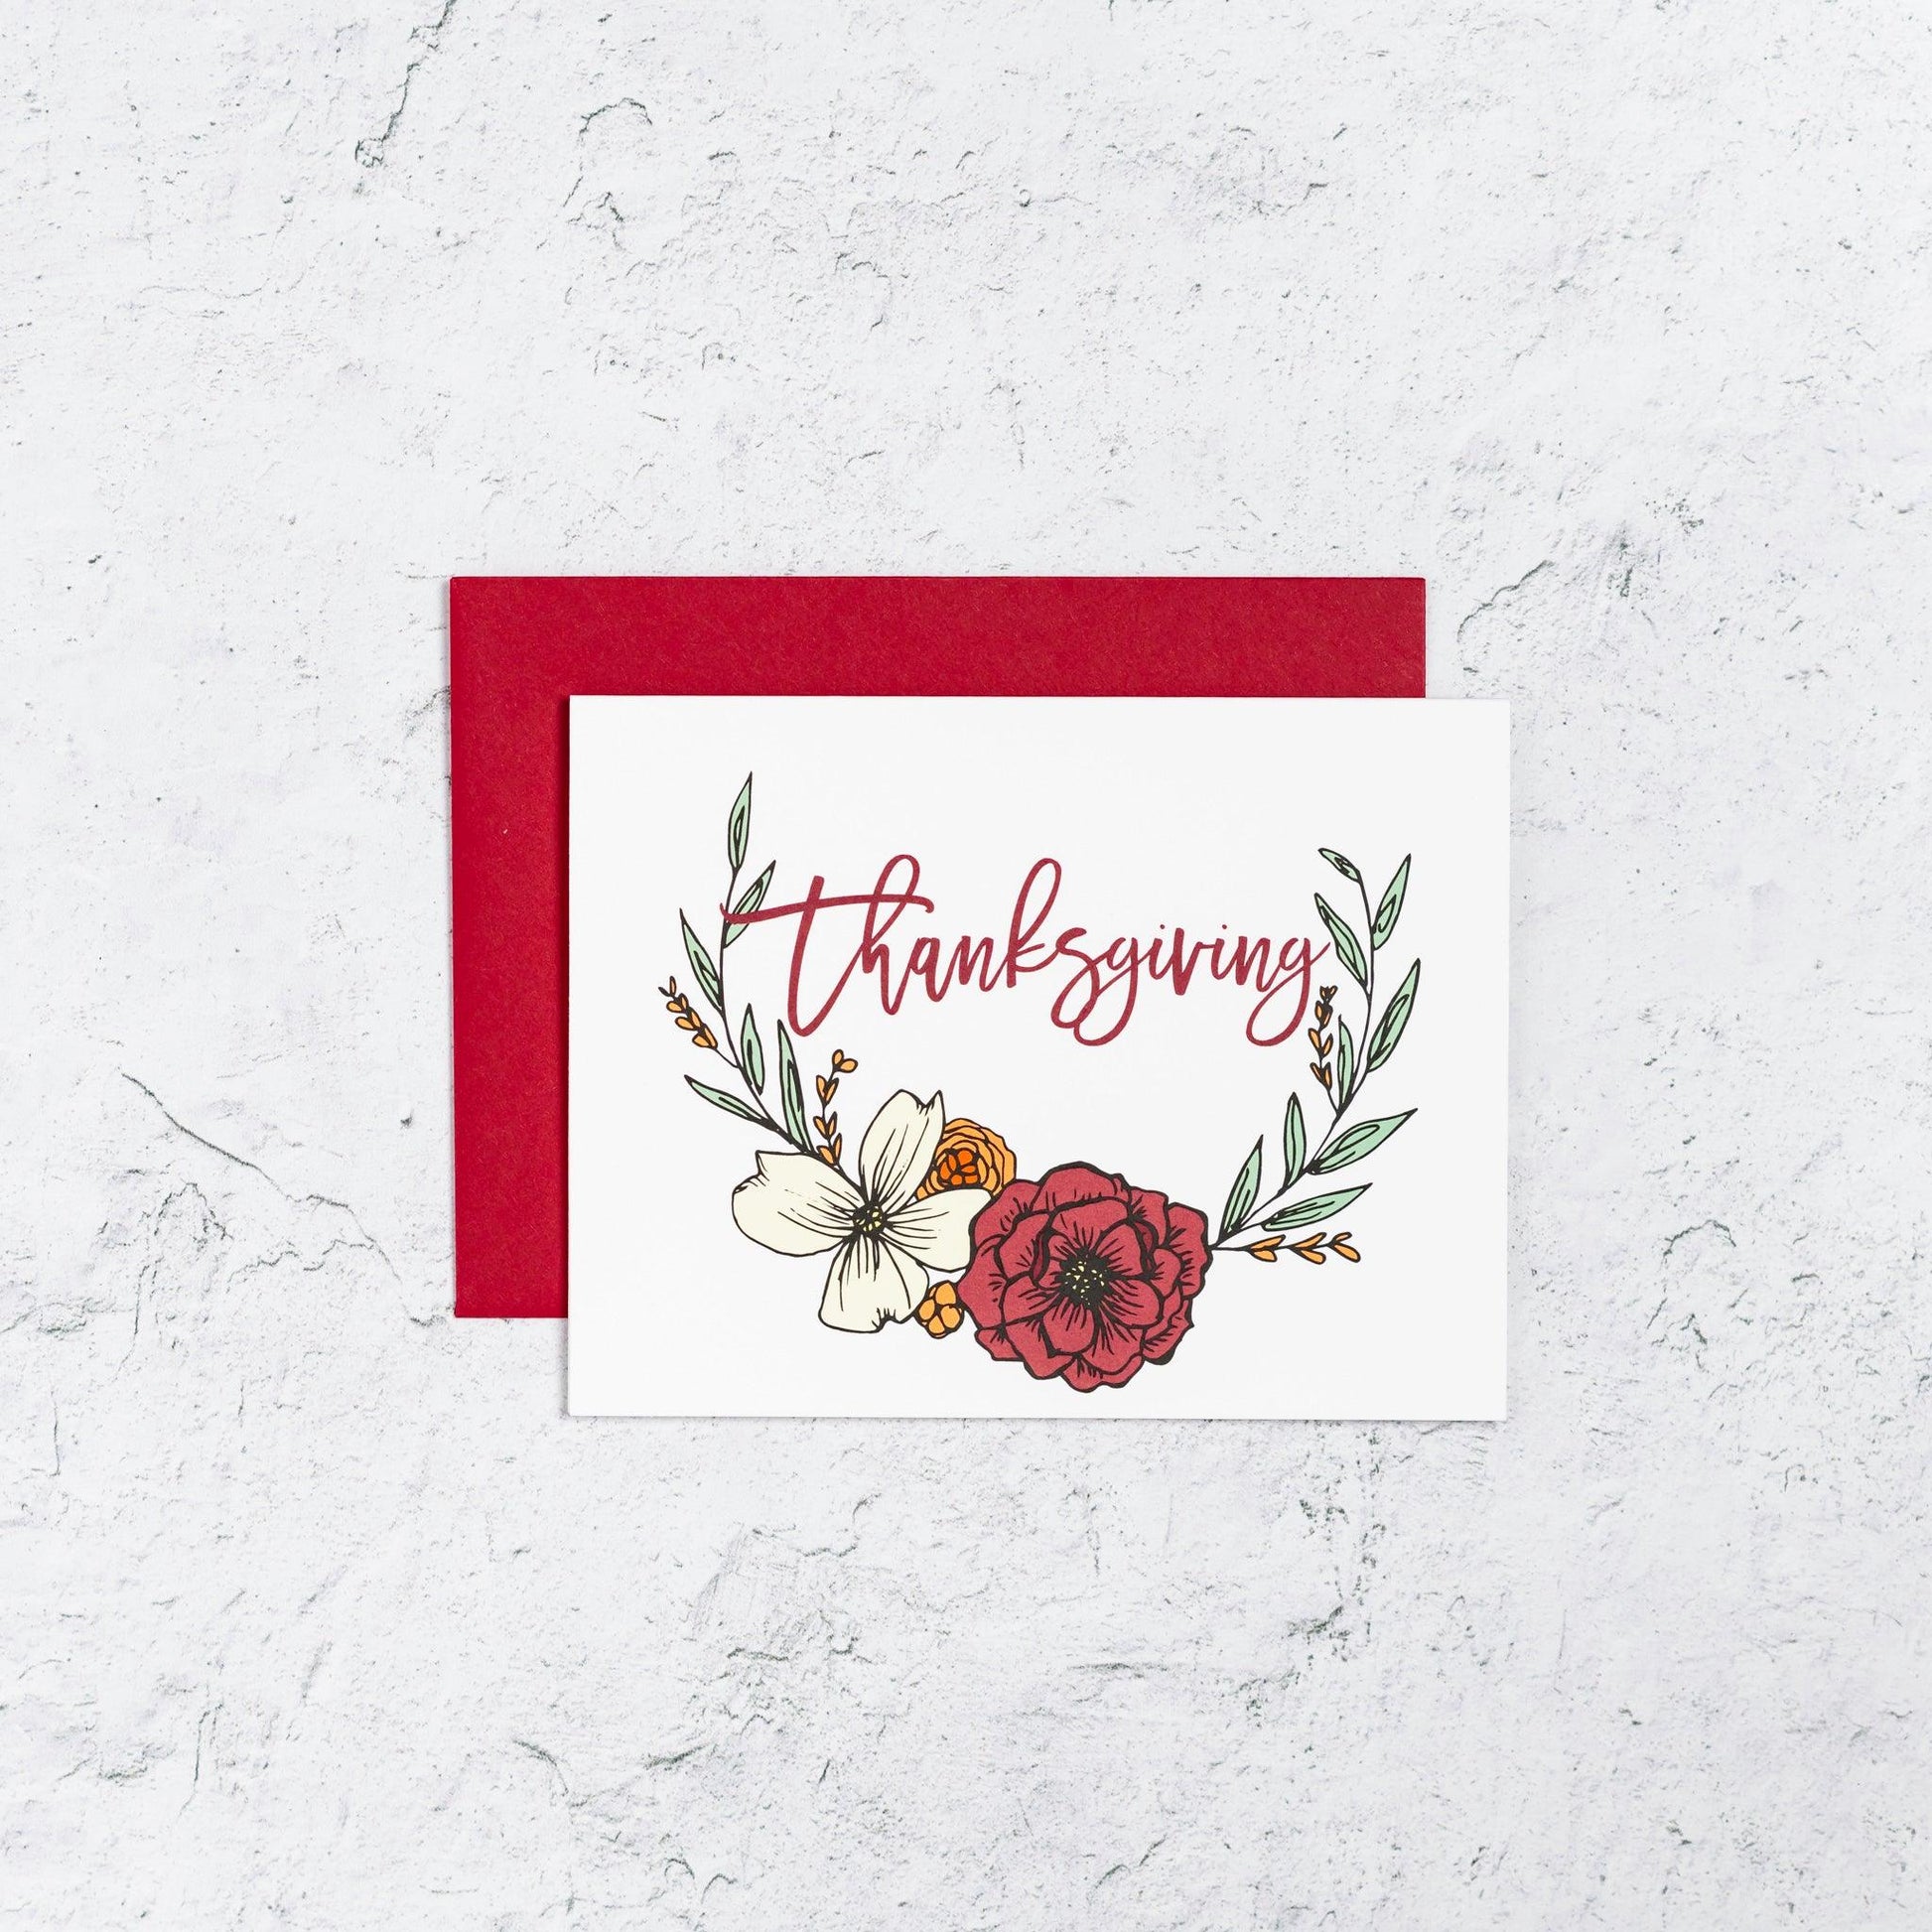 Thanksgiving Card With Floral Wreath